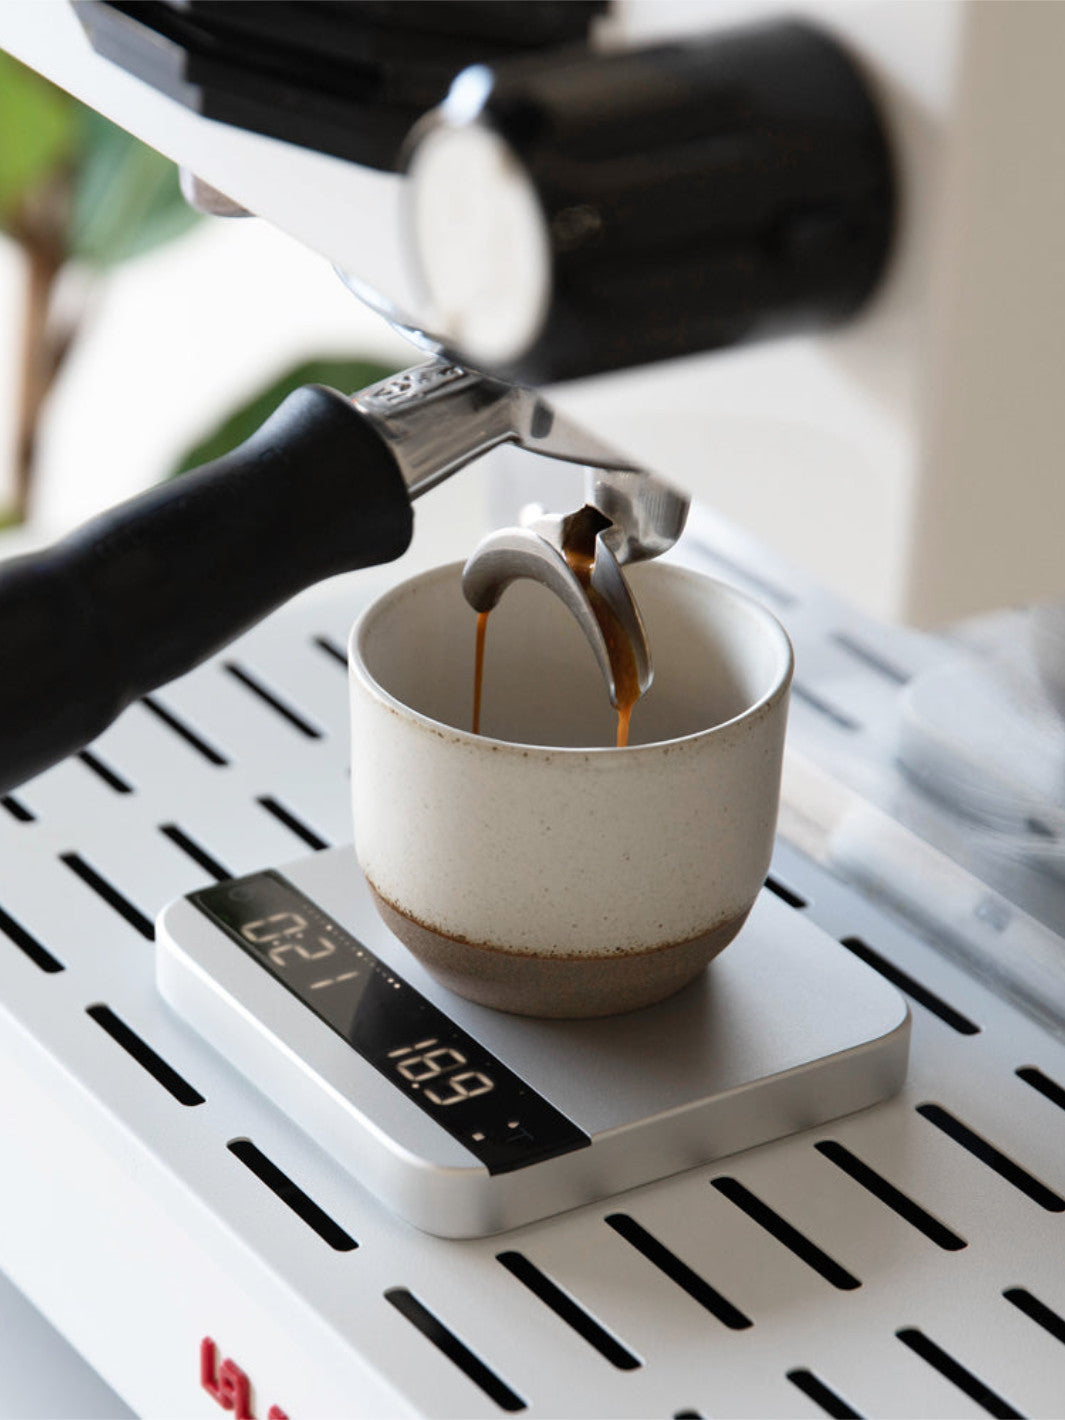 The Acaia Lunar: Trendy Toy or Serviceable Scales? - Perfect Daily